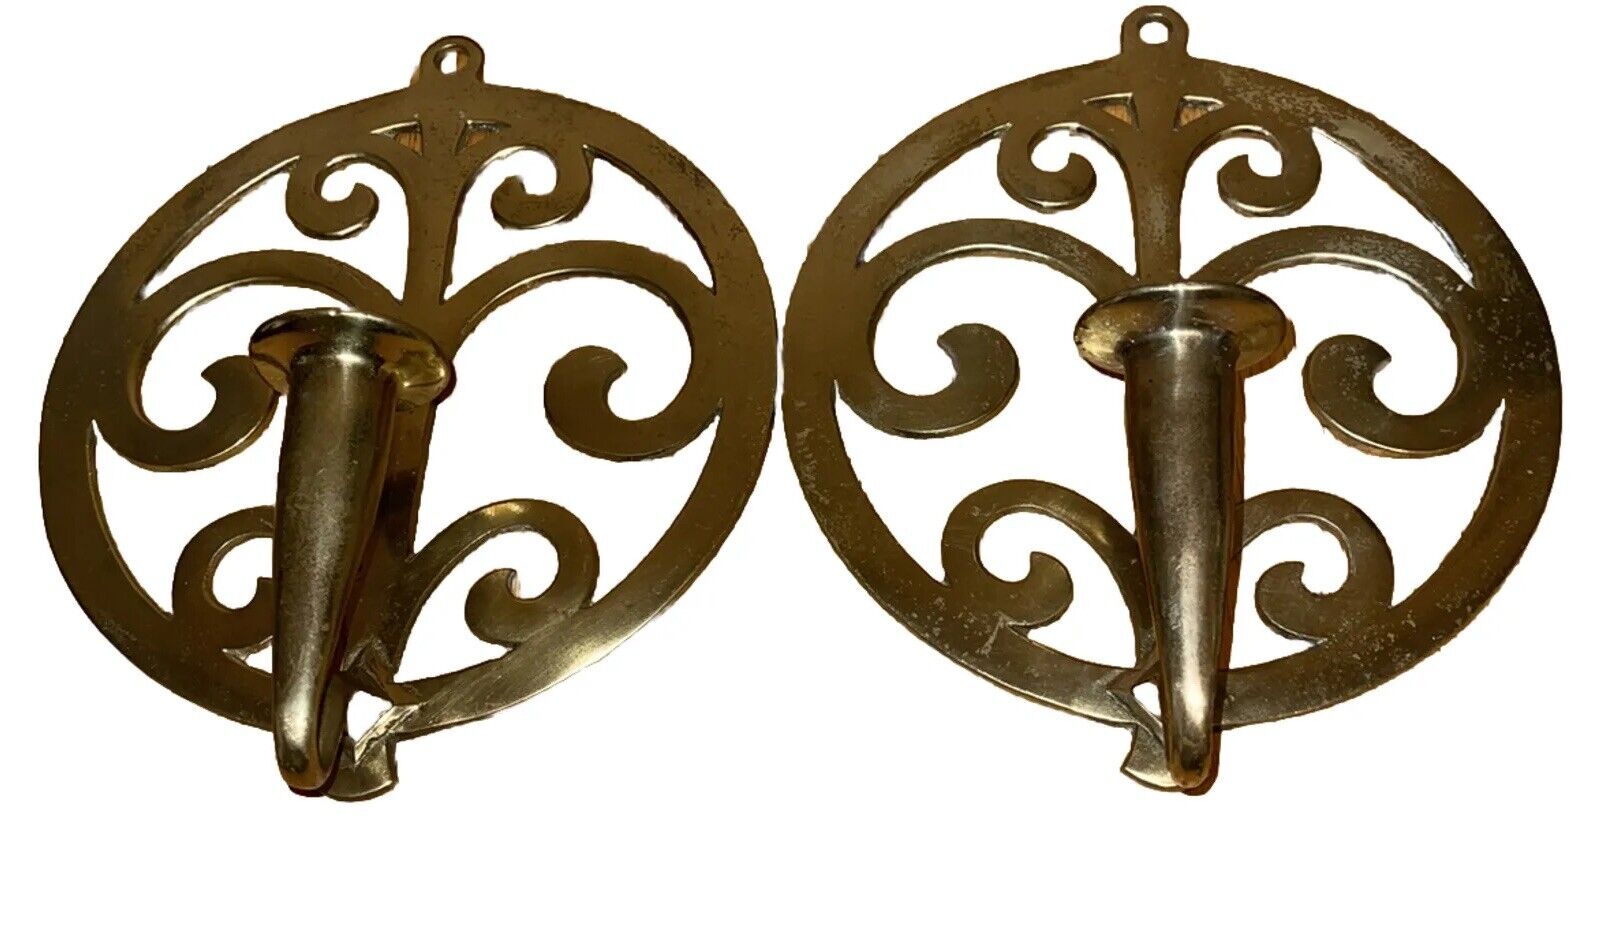 Vintage High-Quality Brass Hanging Candle Wall Sconces Metal crafters